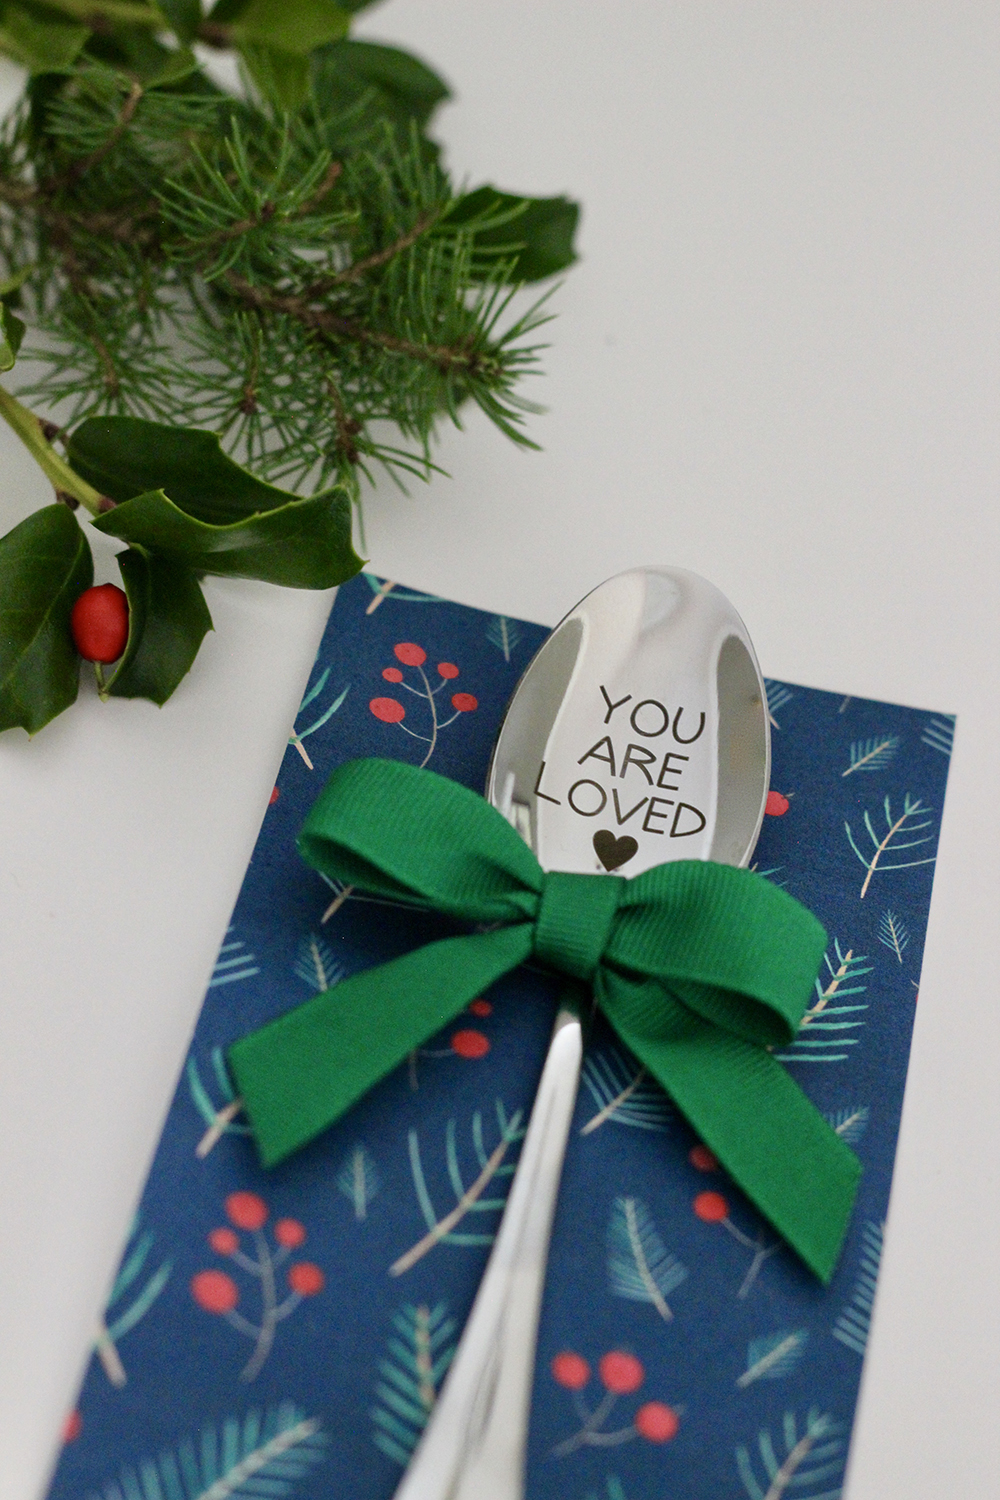 Only a Few Days Left to Order our Engraved Spoons